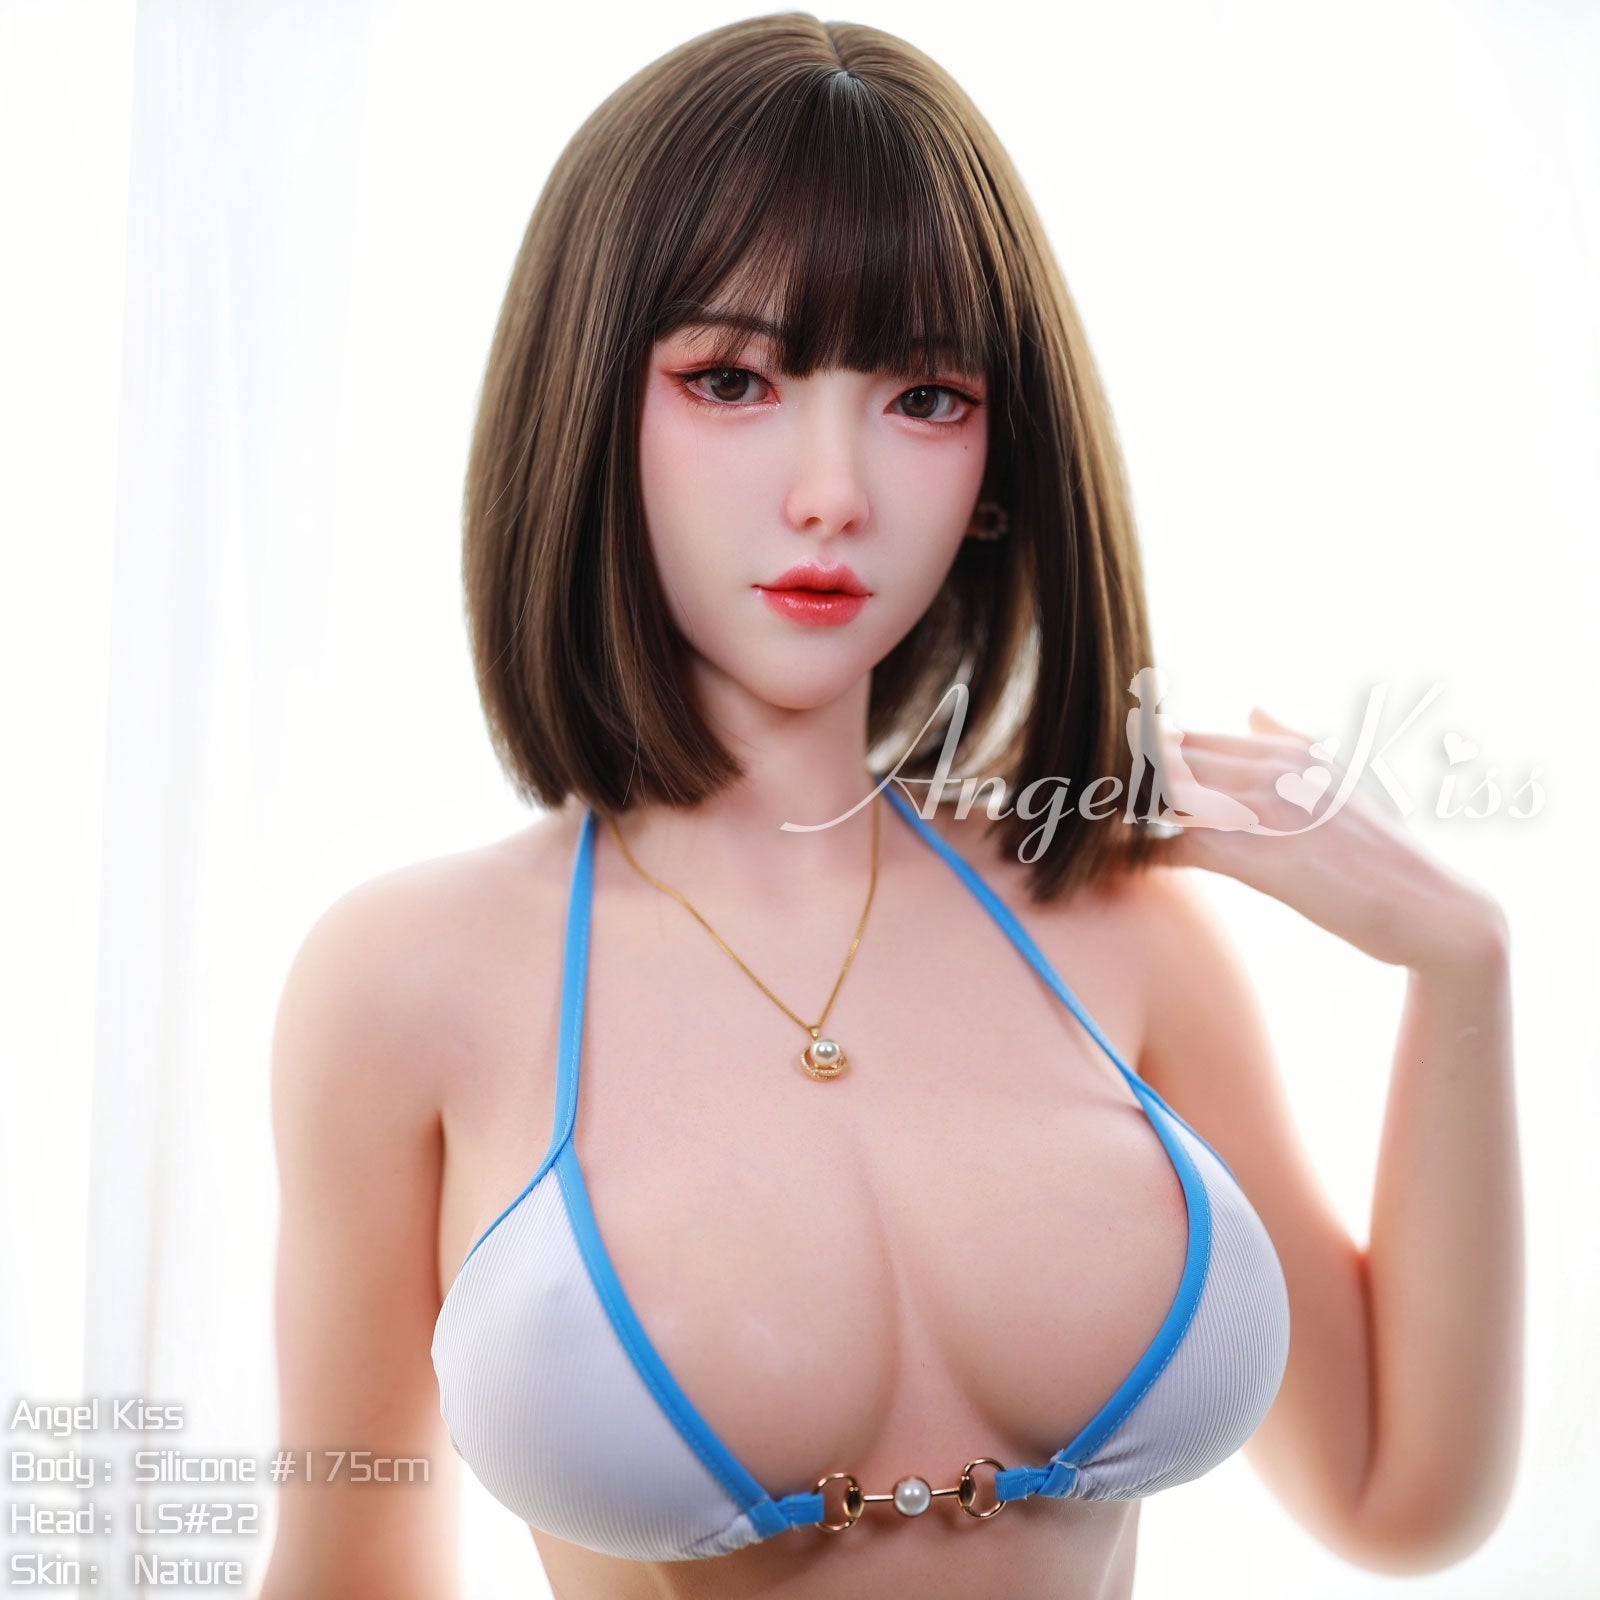 Noelle - S175cm+S#22 wearing green dress short hair woman silicone doll by Anmodolls